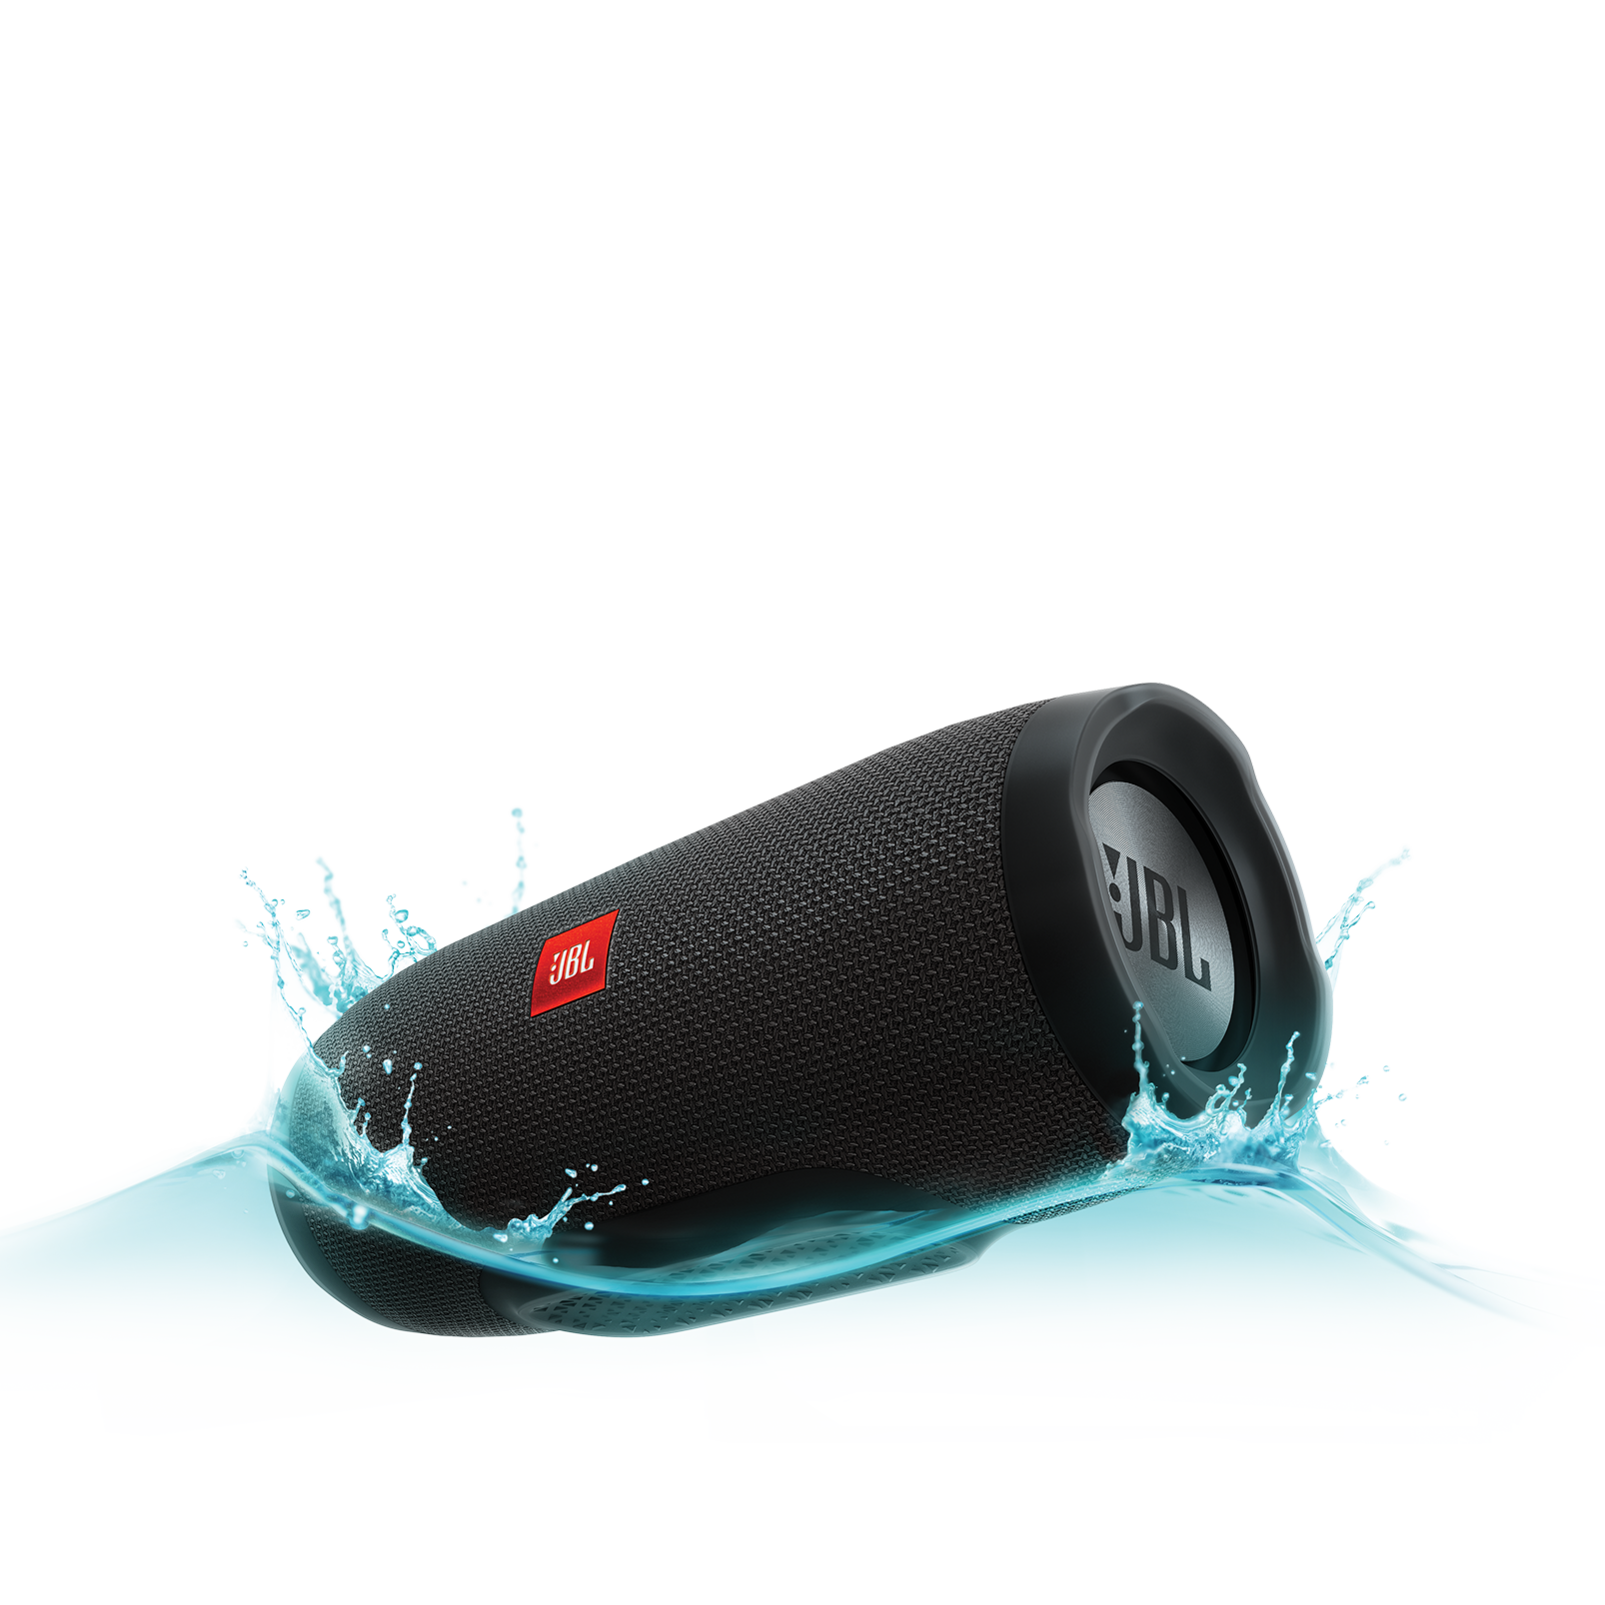 JBL Charge 3 - Black - Full-featured waterproof portable speaker with high-capacity battery to charge your devices - Hero